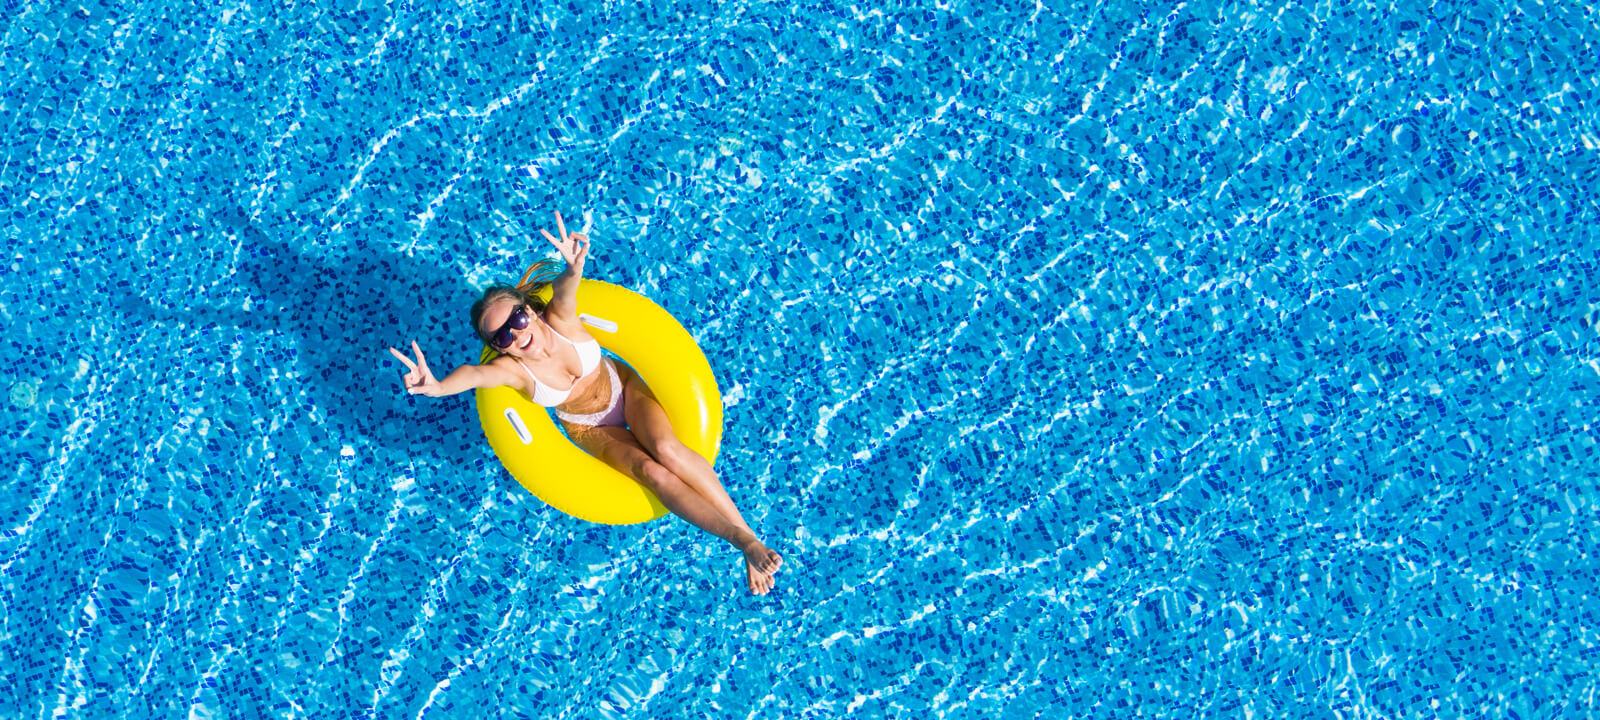 Beautiful Woman In Swimming Pool Aerial Top View From Above. Young Girl In Bikini Relaxes And Swims On Inflatable Ring Donut And Has Fun In Water On Family Vacation, Tropical Holiday Resort